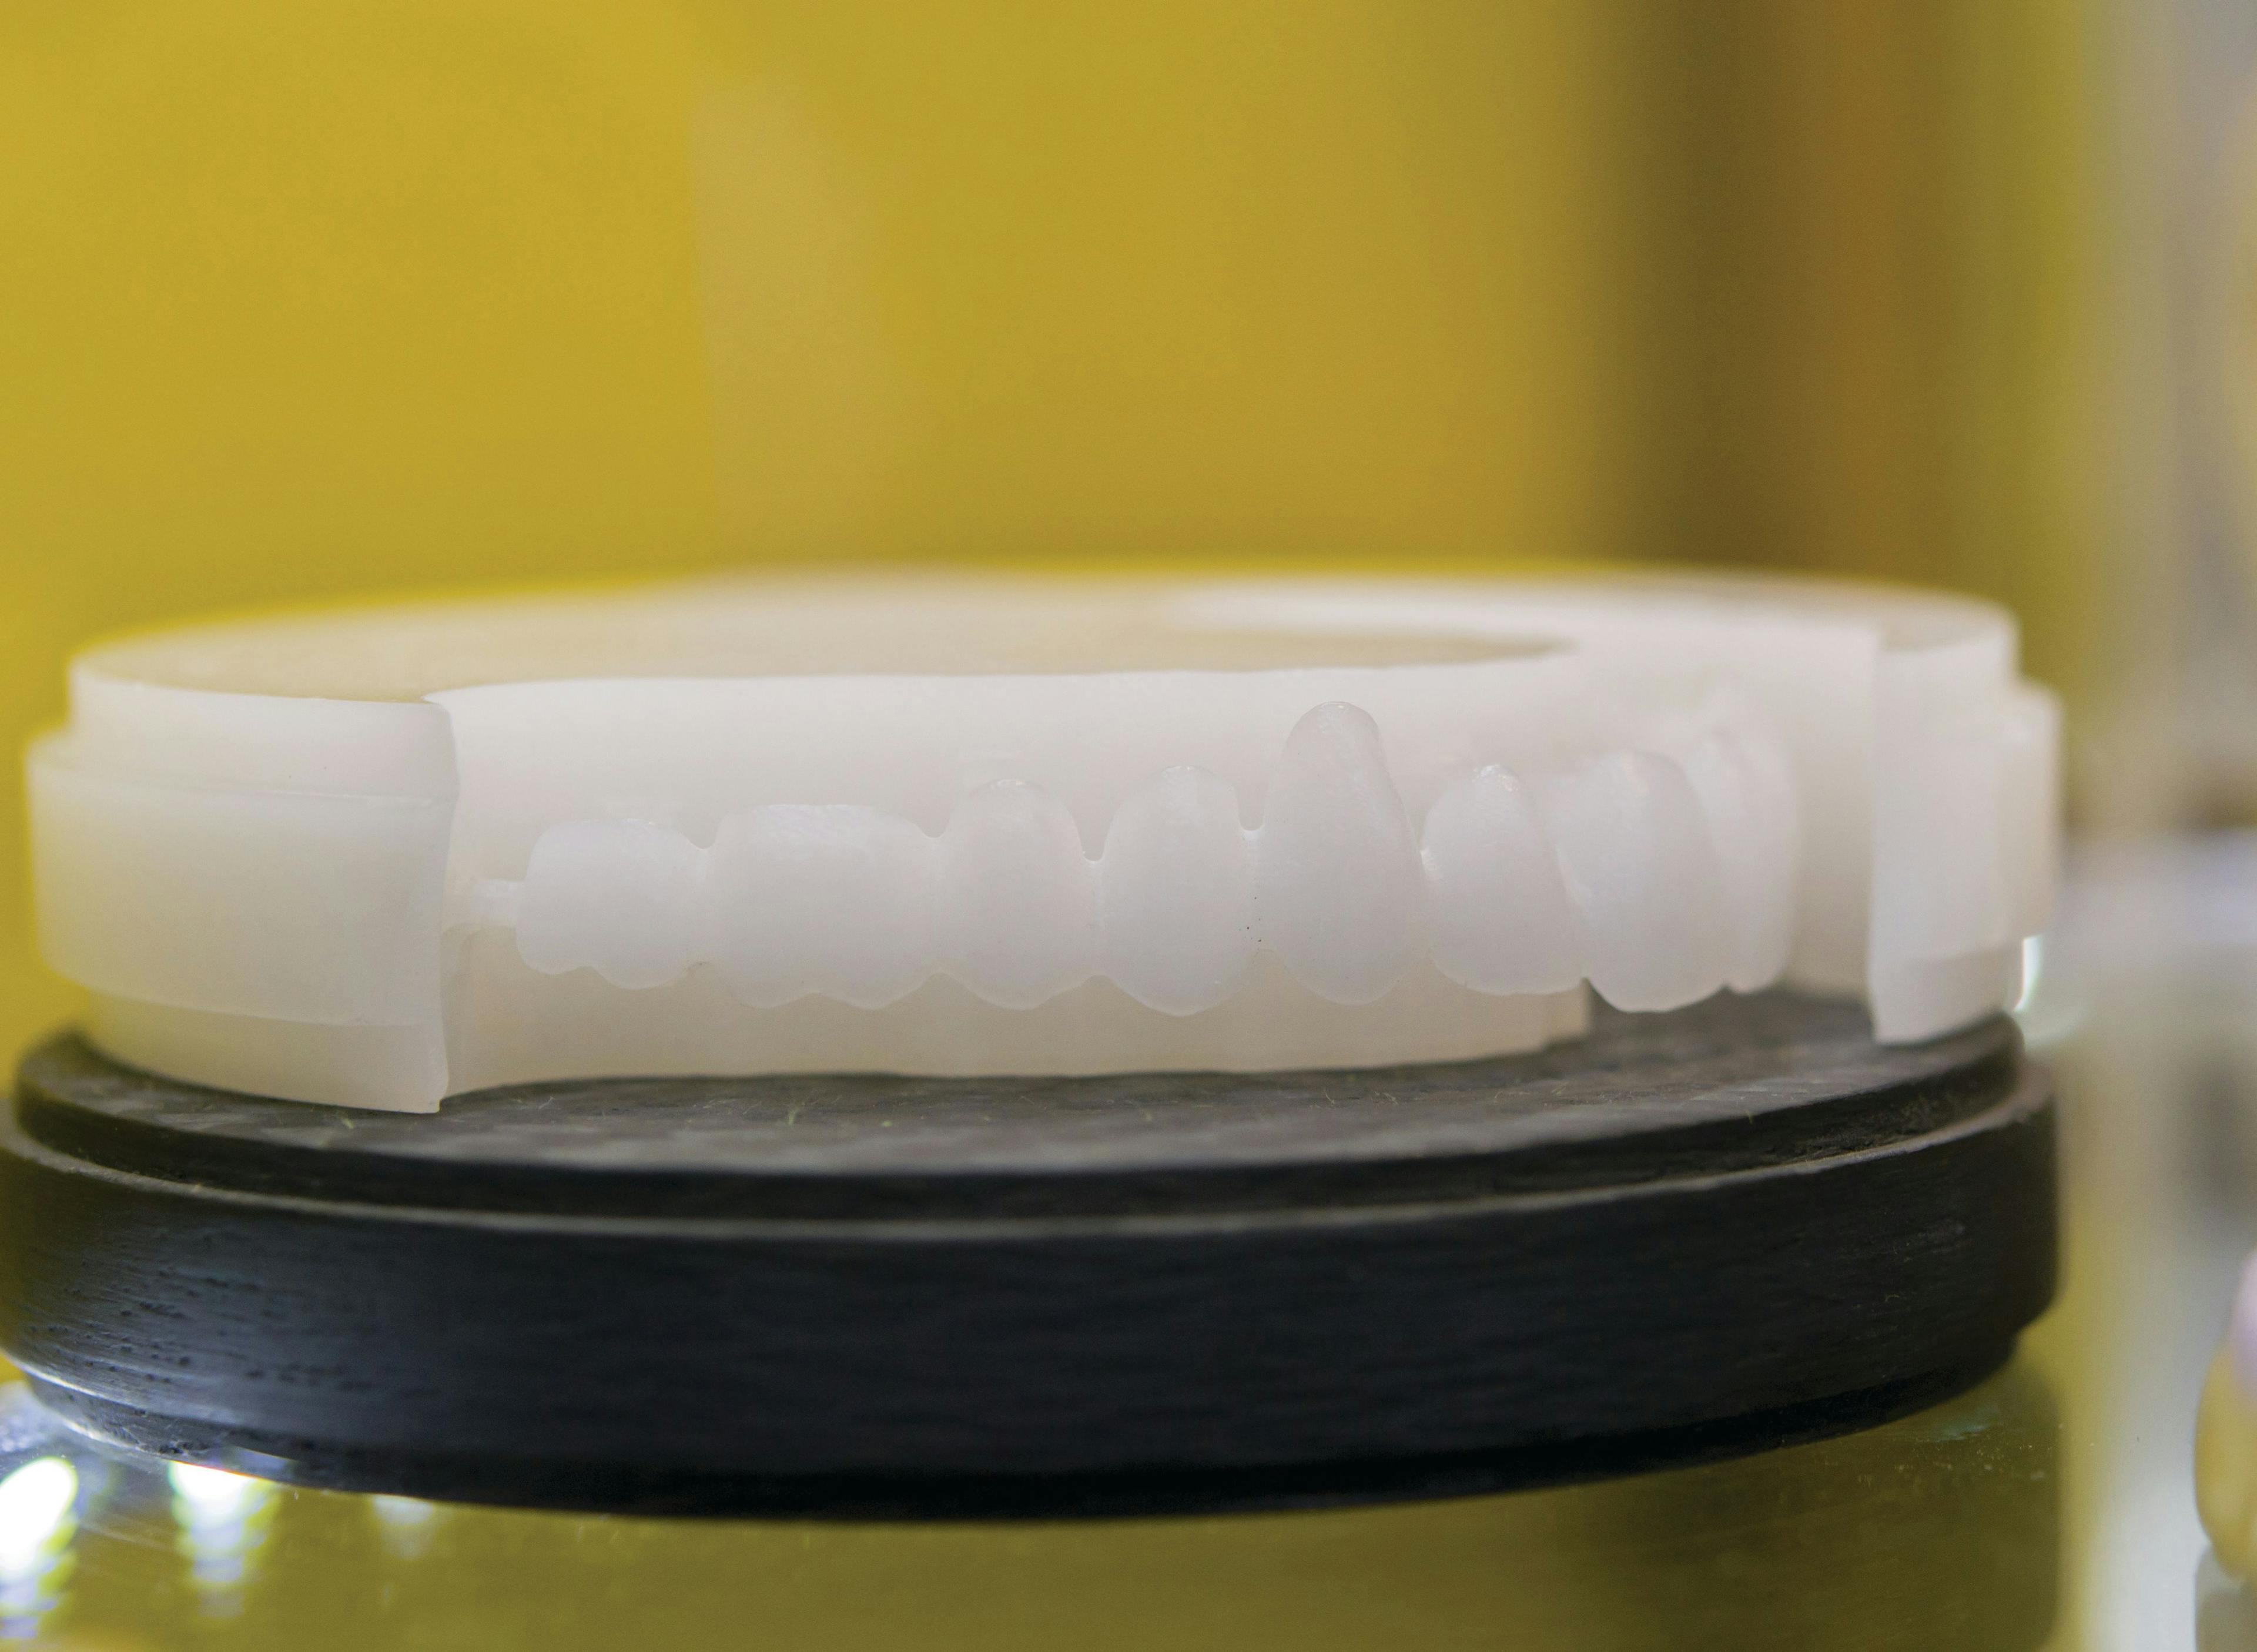 Digital Dentistry Offerings Made Great by Today’s Dental Lab Materials 